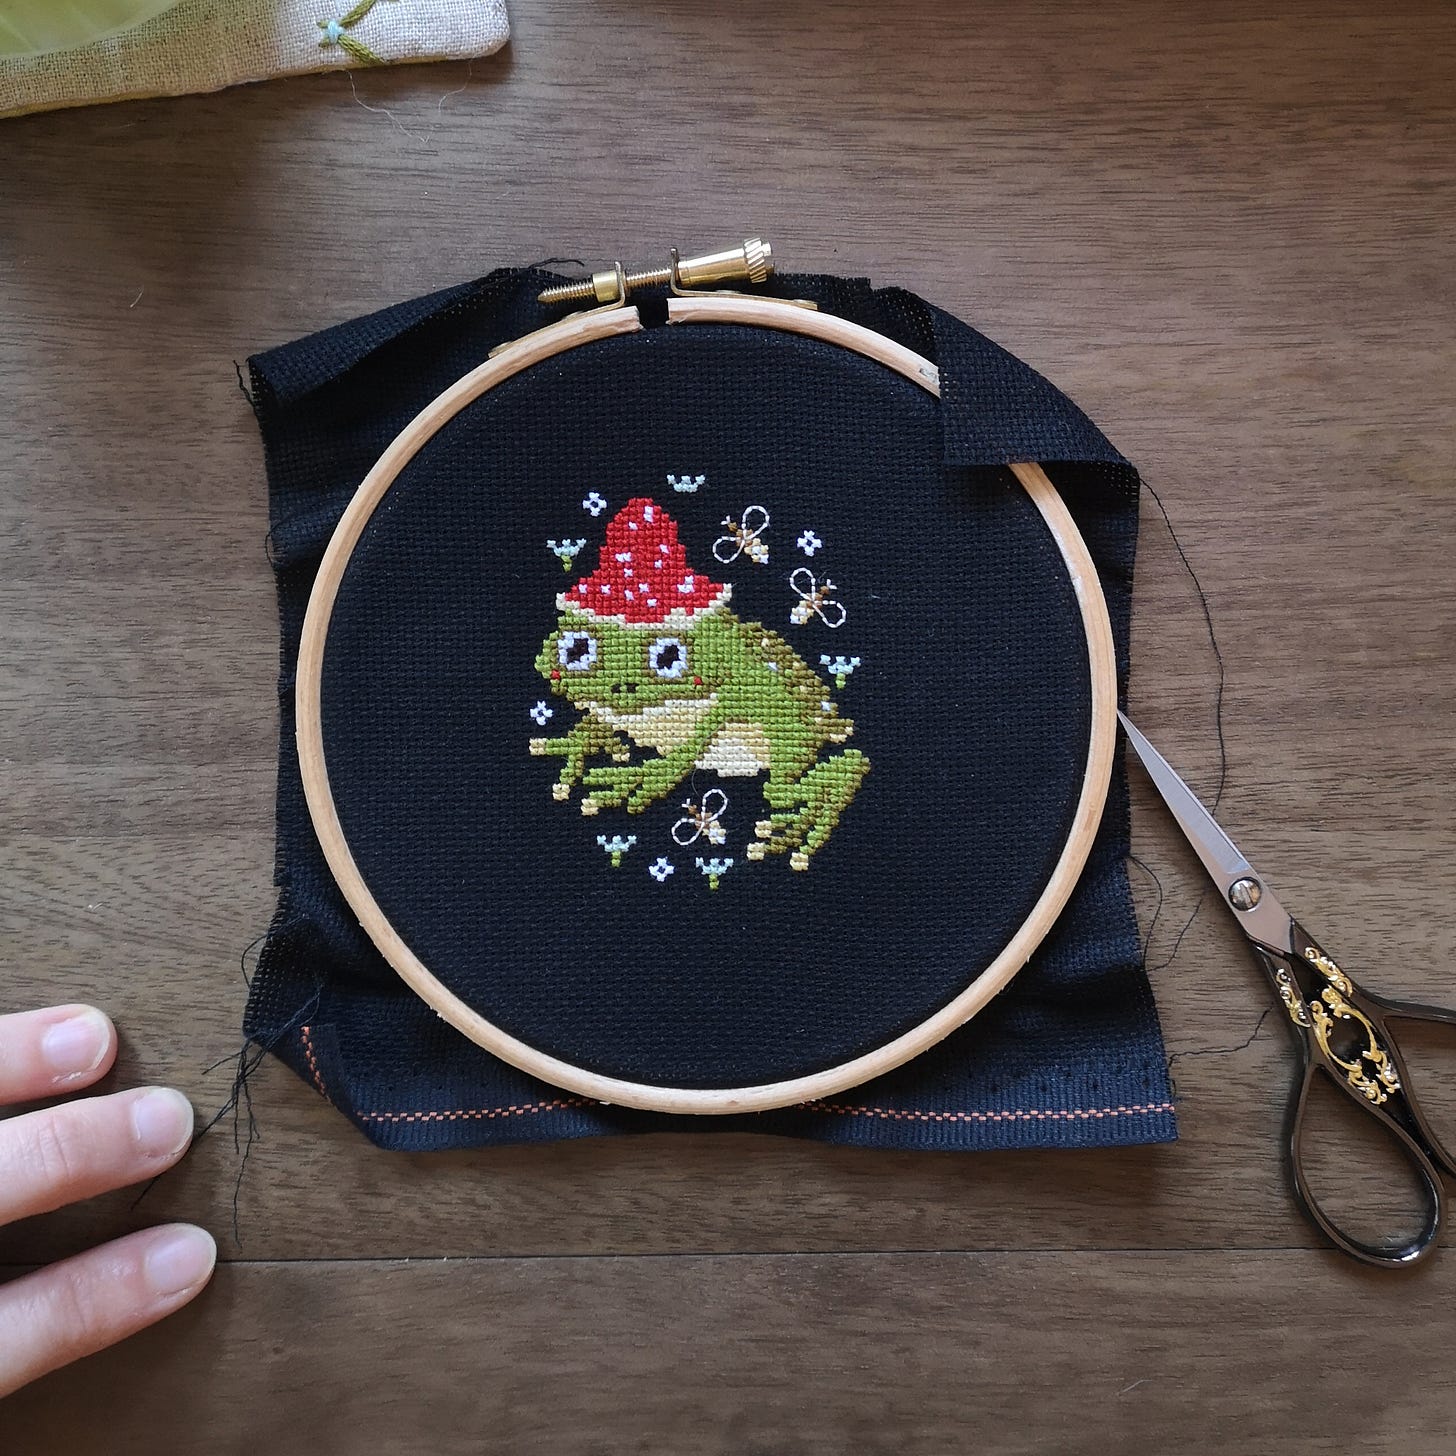 A small embroidery hoop containing black aida fabric and a cross stitched green frog wearing a red spotted mushroom for a cap. The frog is surrounded by bees and flowers. 